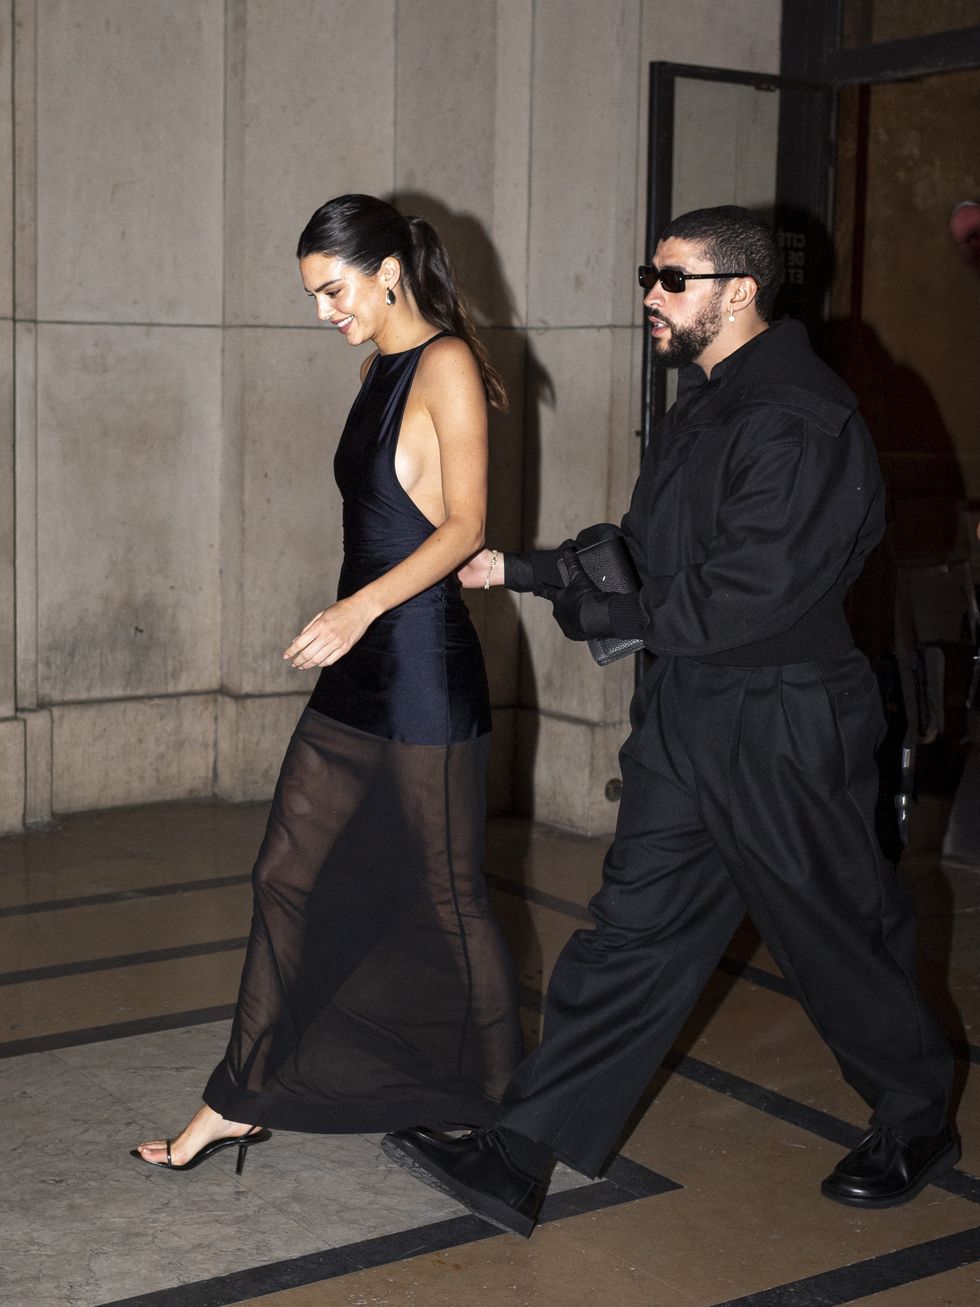 Kendall Jenner Elevates a Semi-Sheer Black Dress on a Date With Bad Bunny - ELLE